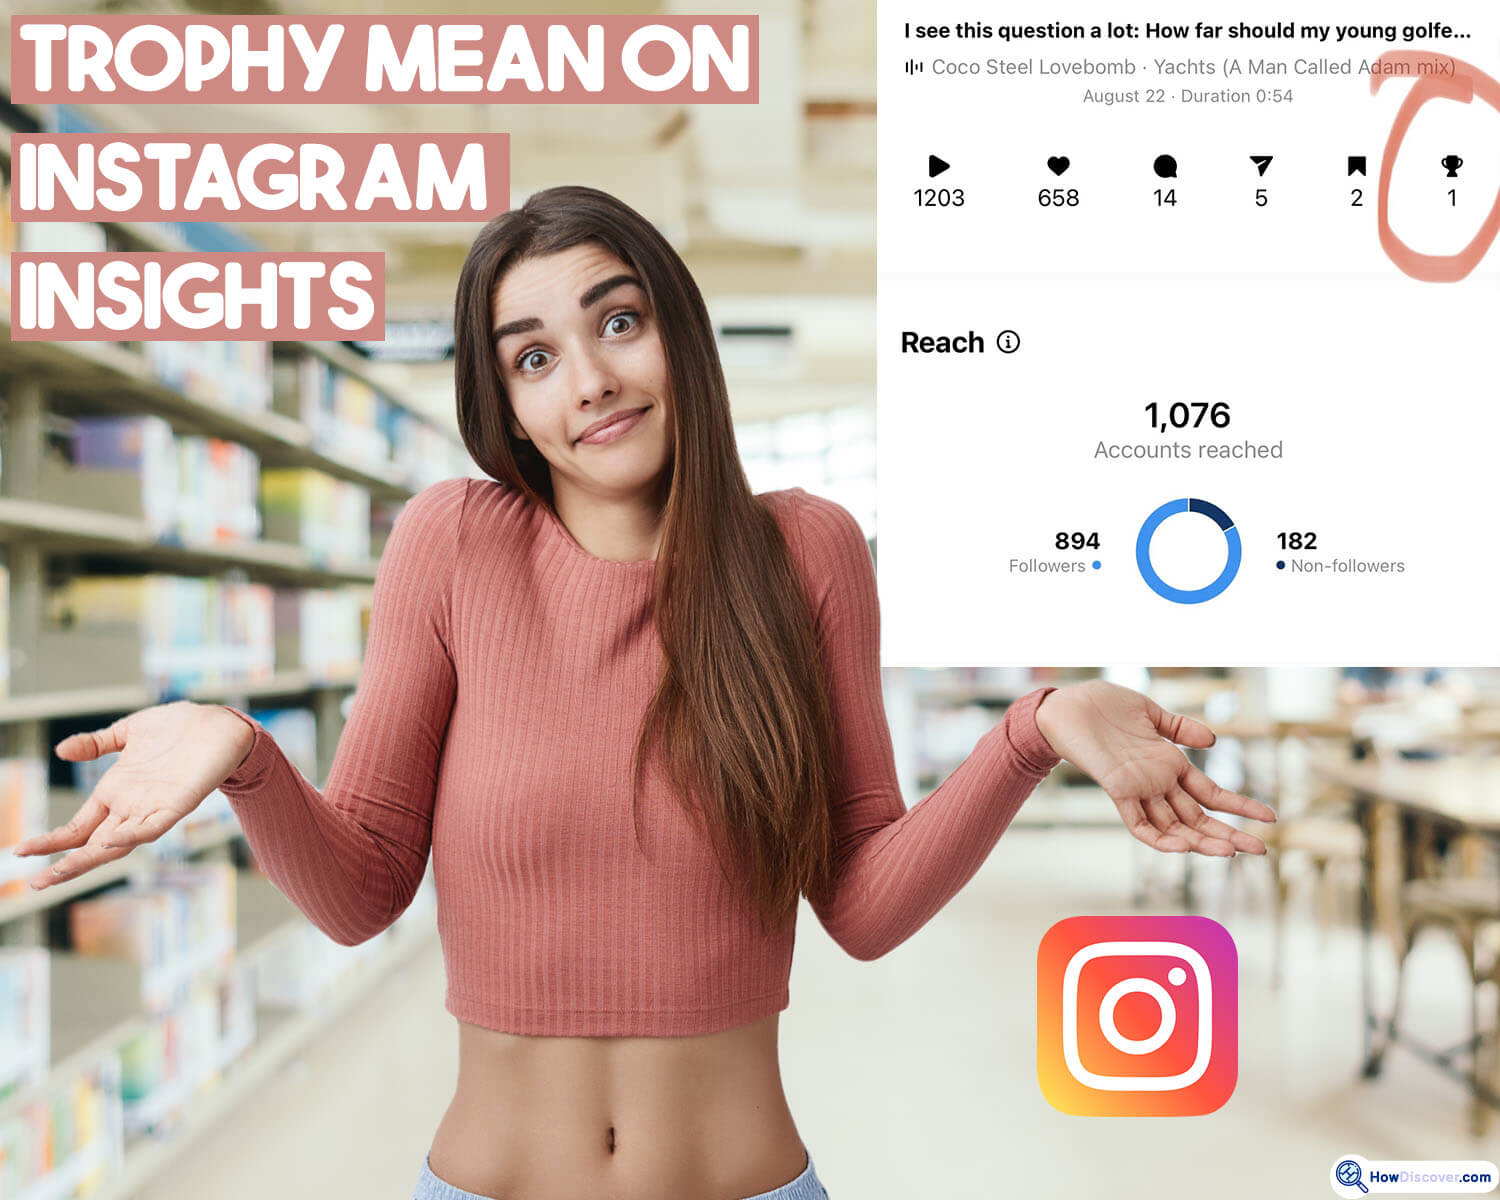 What does the Trophy mean on Instagram insights?